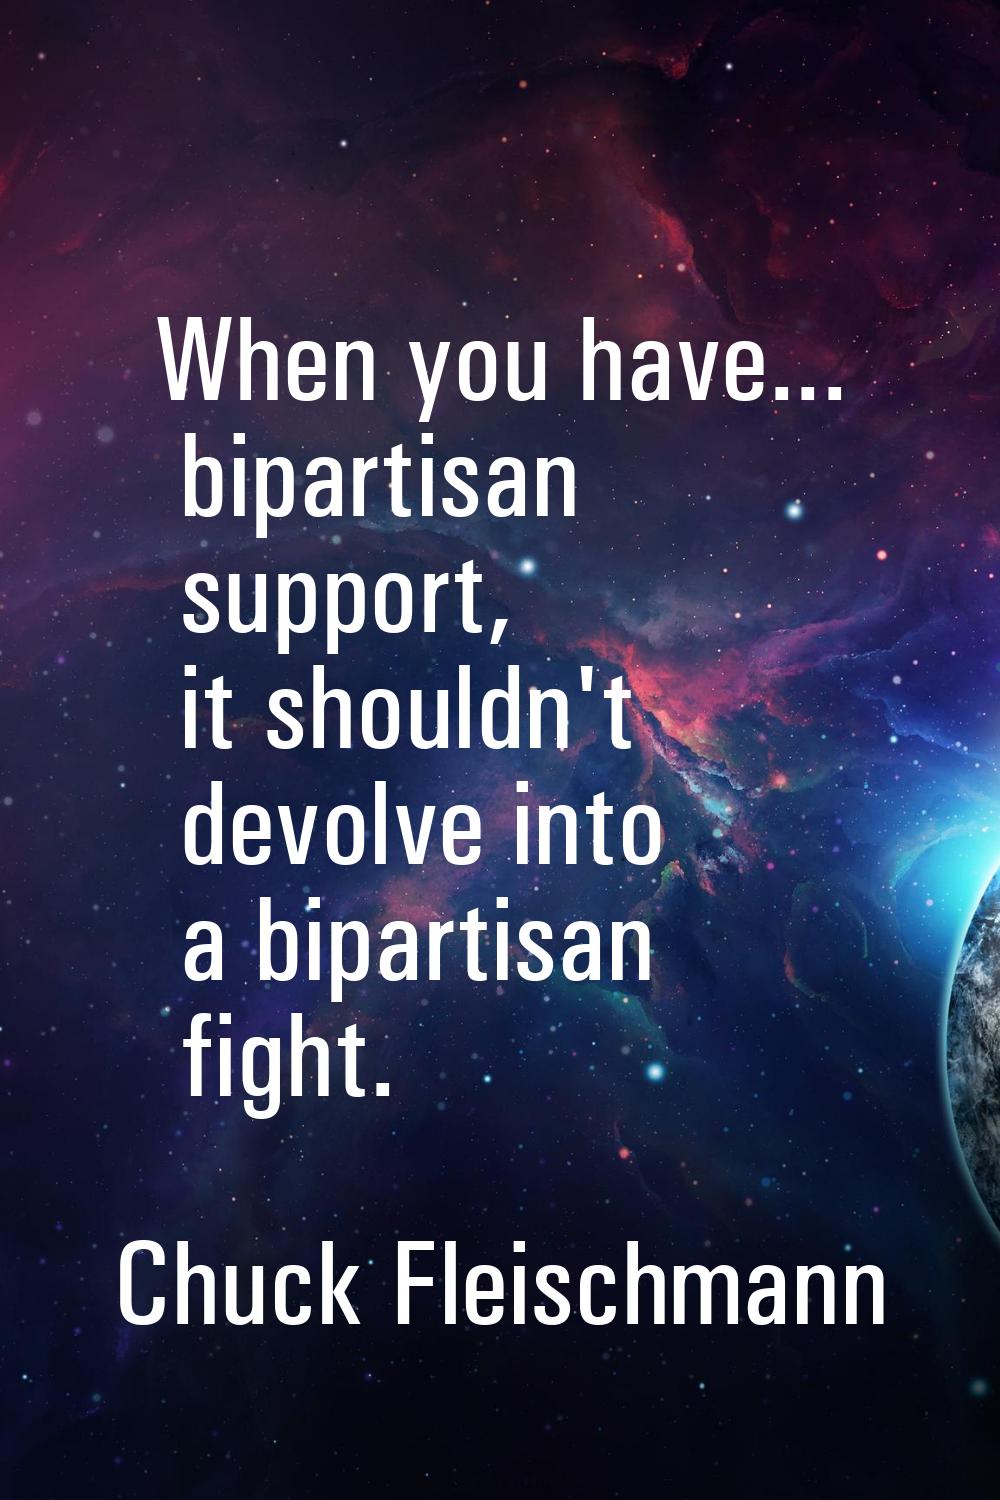 When you have... bipartisan support, it shouldn't devolve into a bipartisan fight.